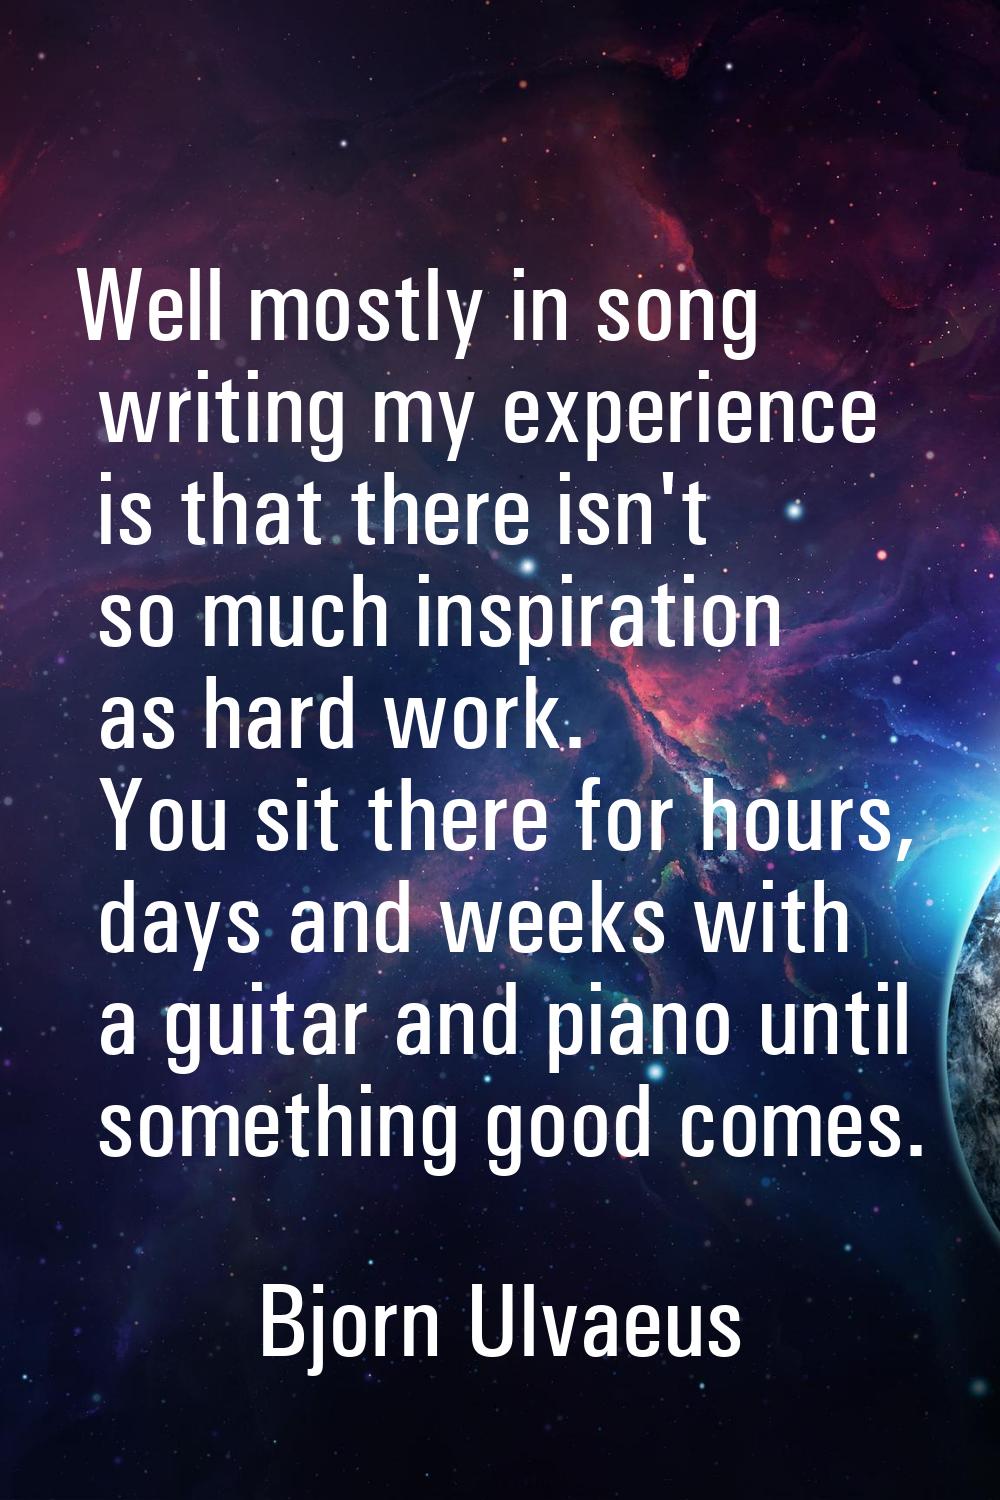 Well mostly in song writing my experience is that there isn't so much inspiration as hard work. You